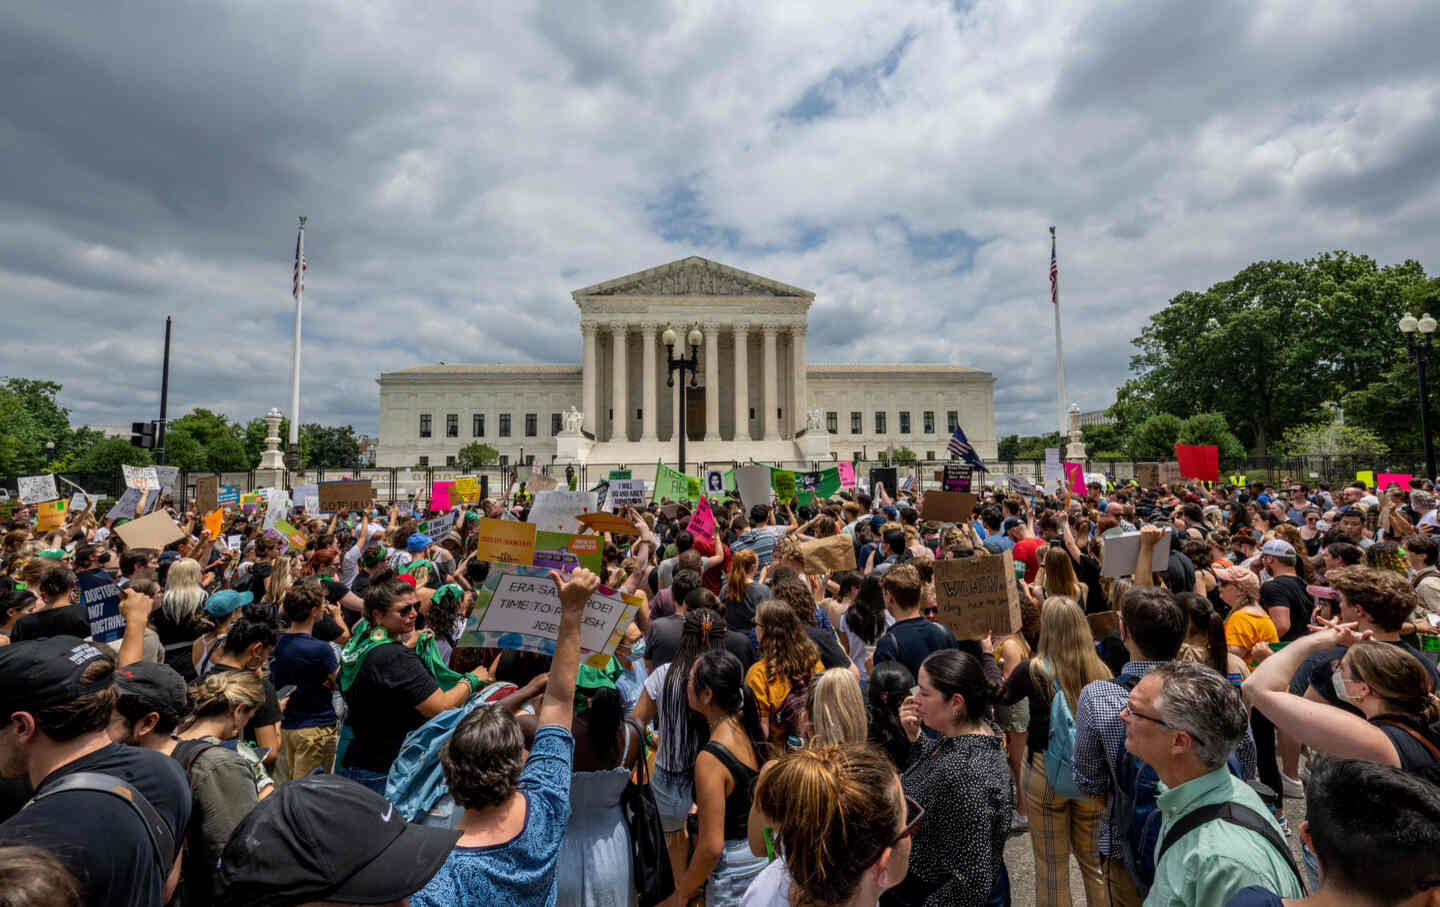 People protest in front of the US Supreme Court on June 24, 2022, in Washington, D.C in response to the Dobbs v. Jackson Women's Health Organization ruling.